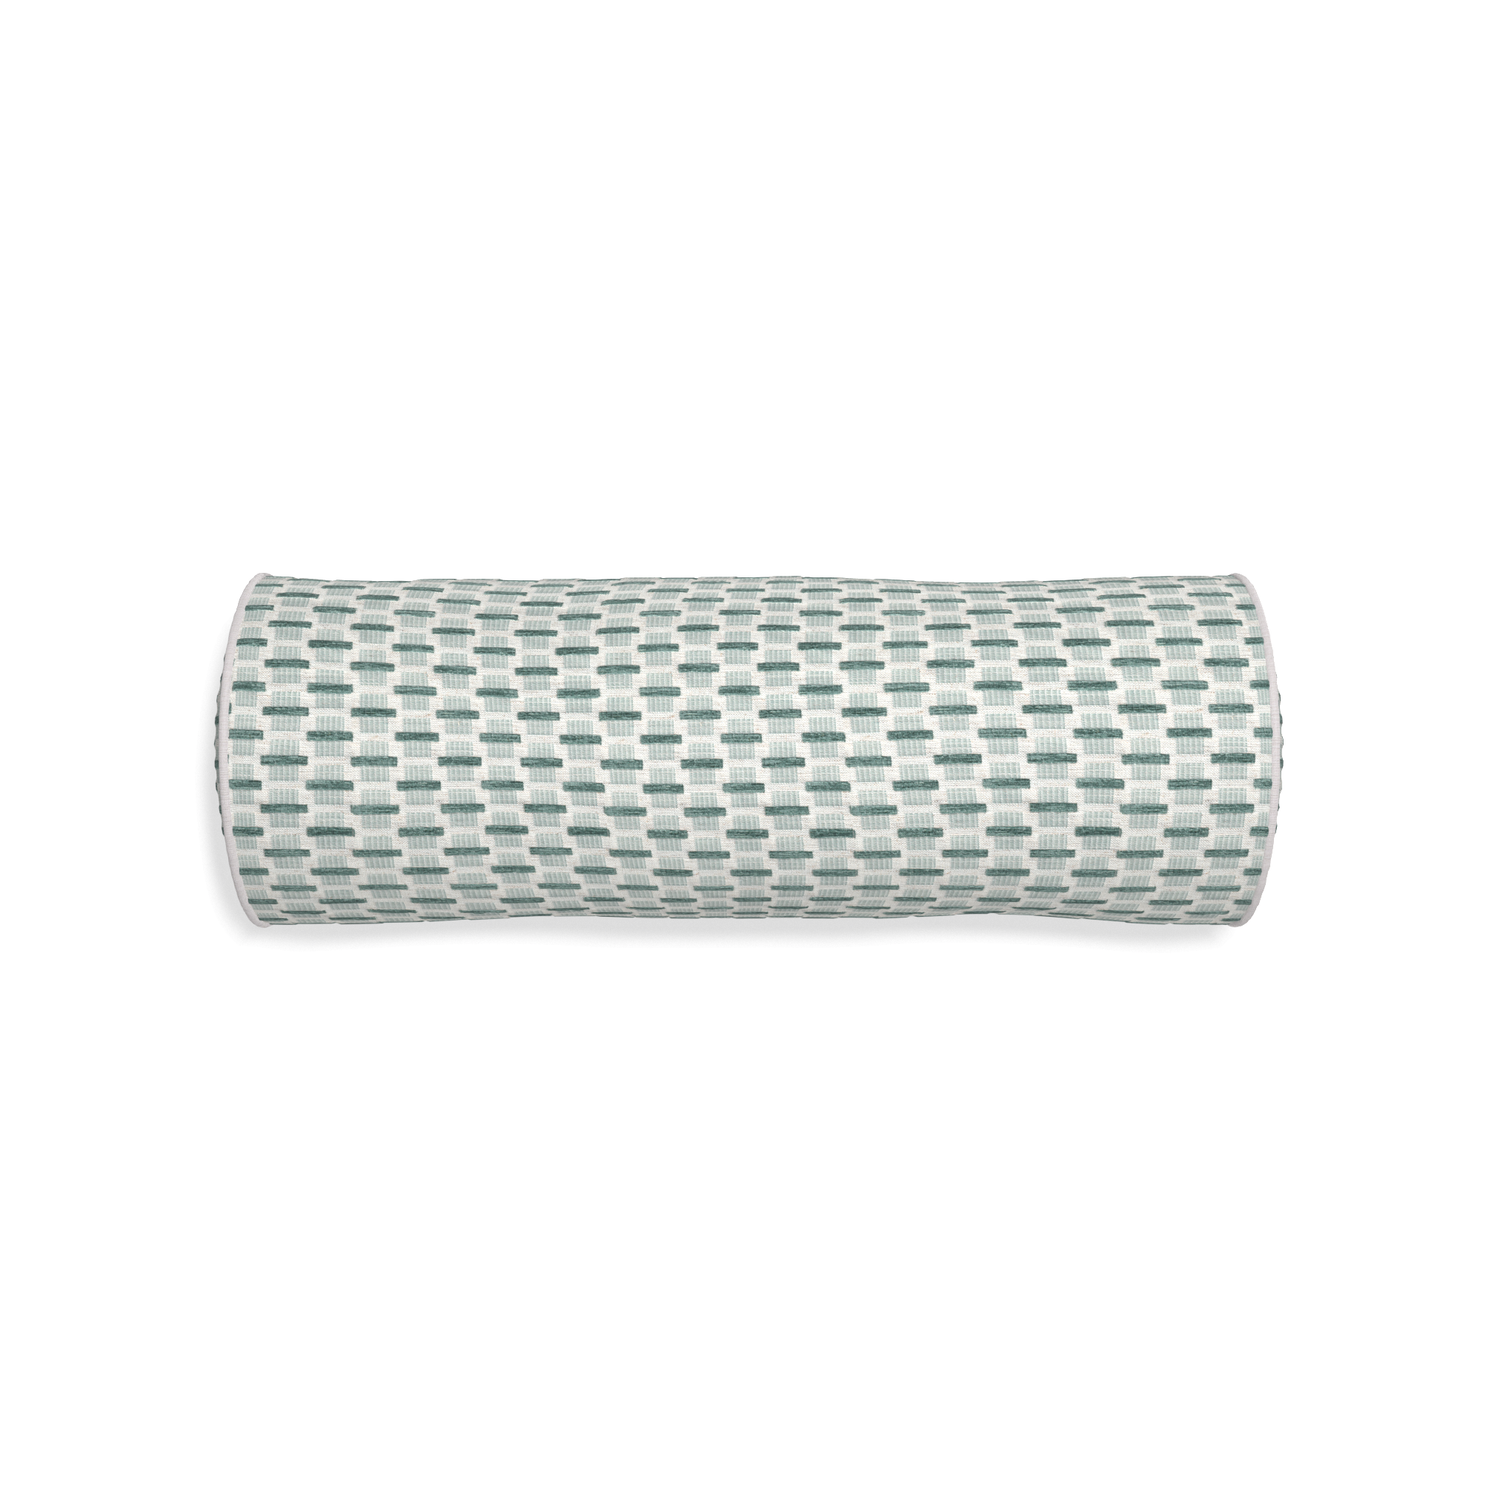 Bolster willow mint custom green geometric chenillepillow with pebble piping on white background